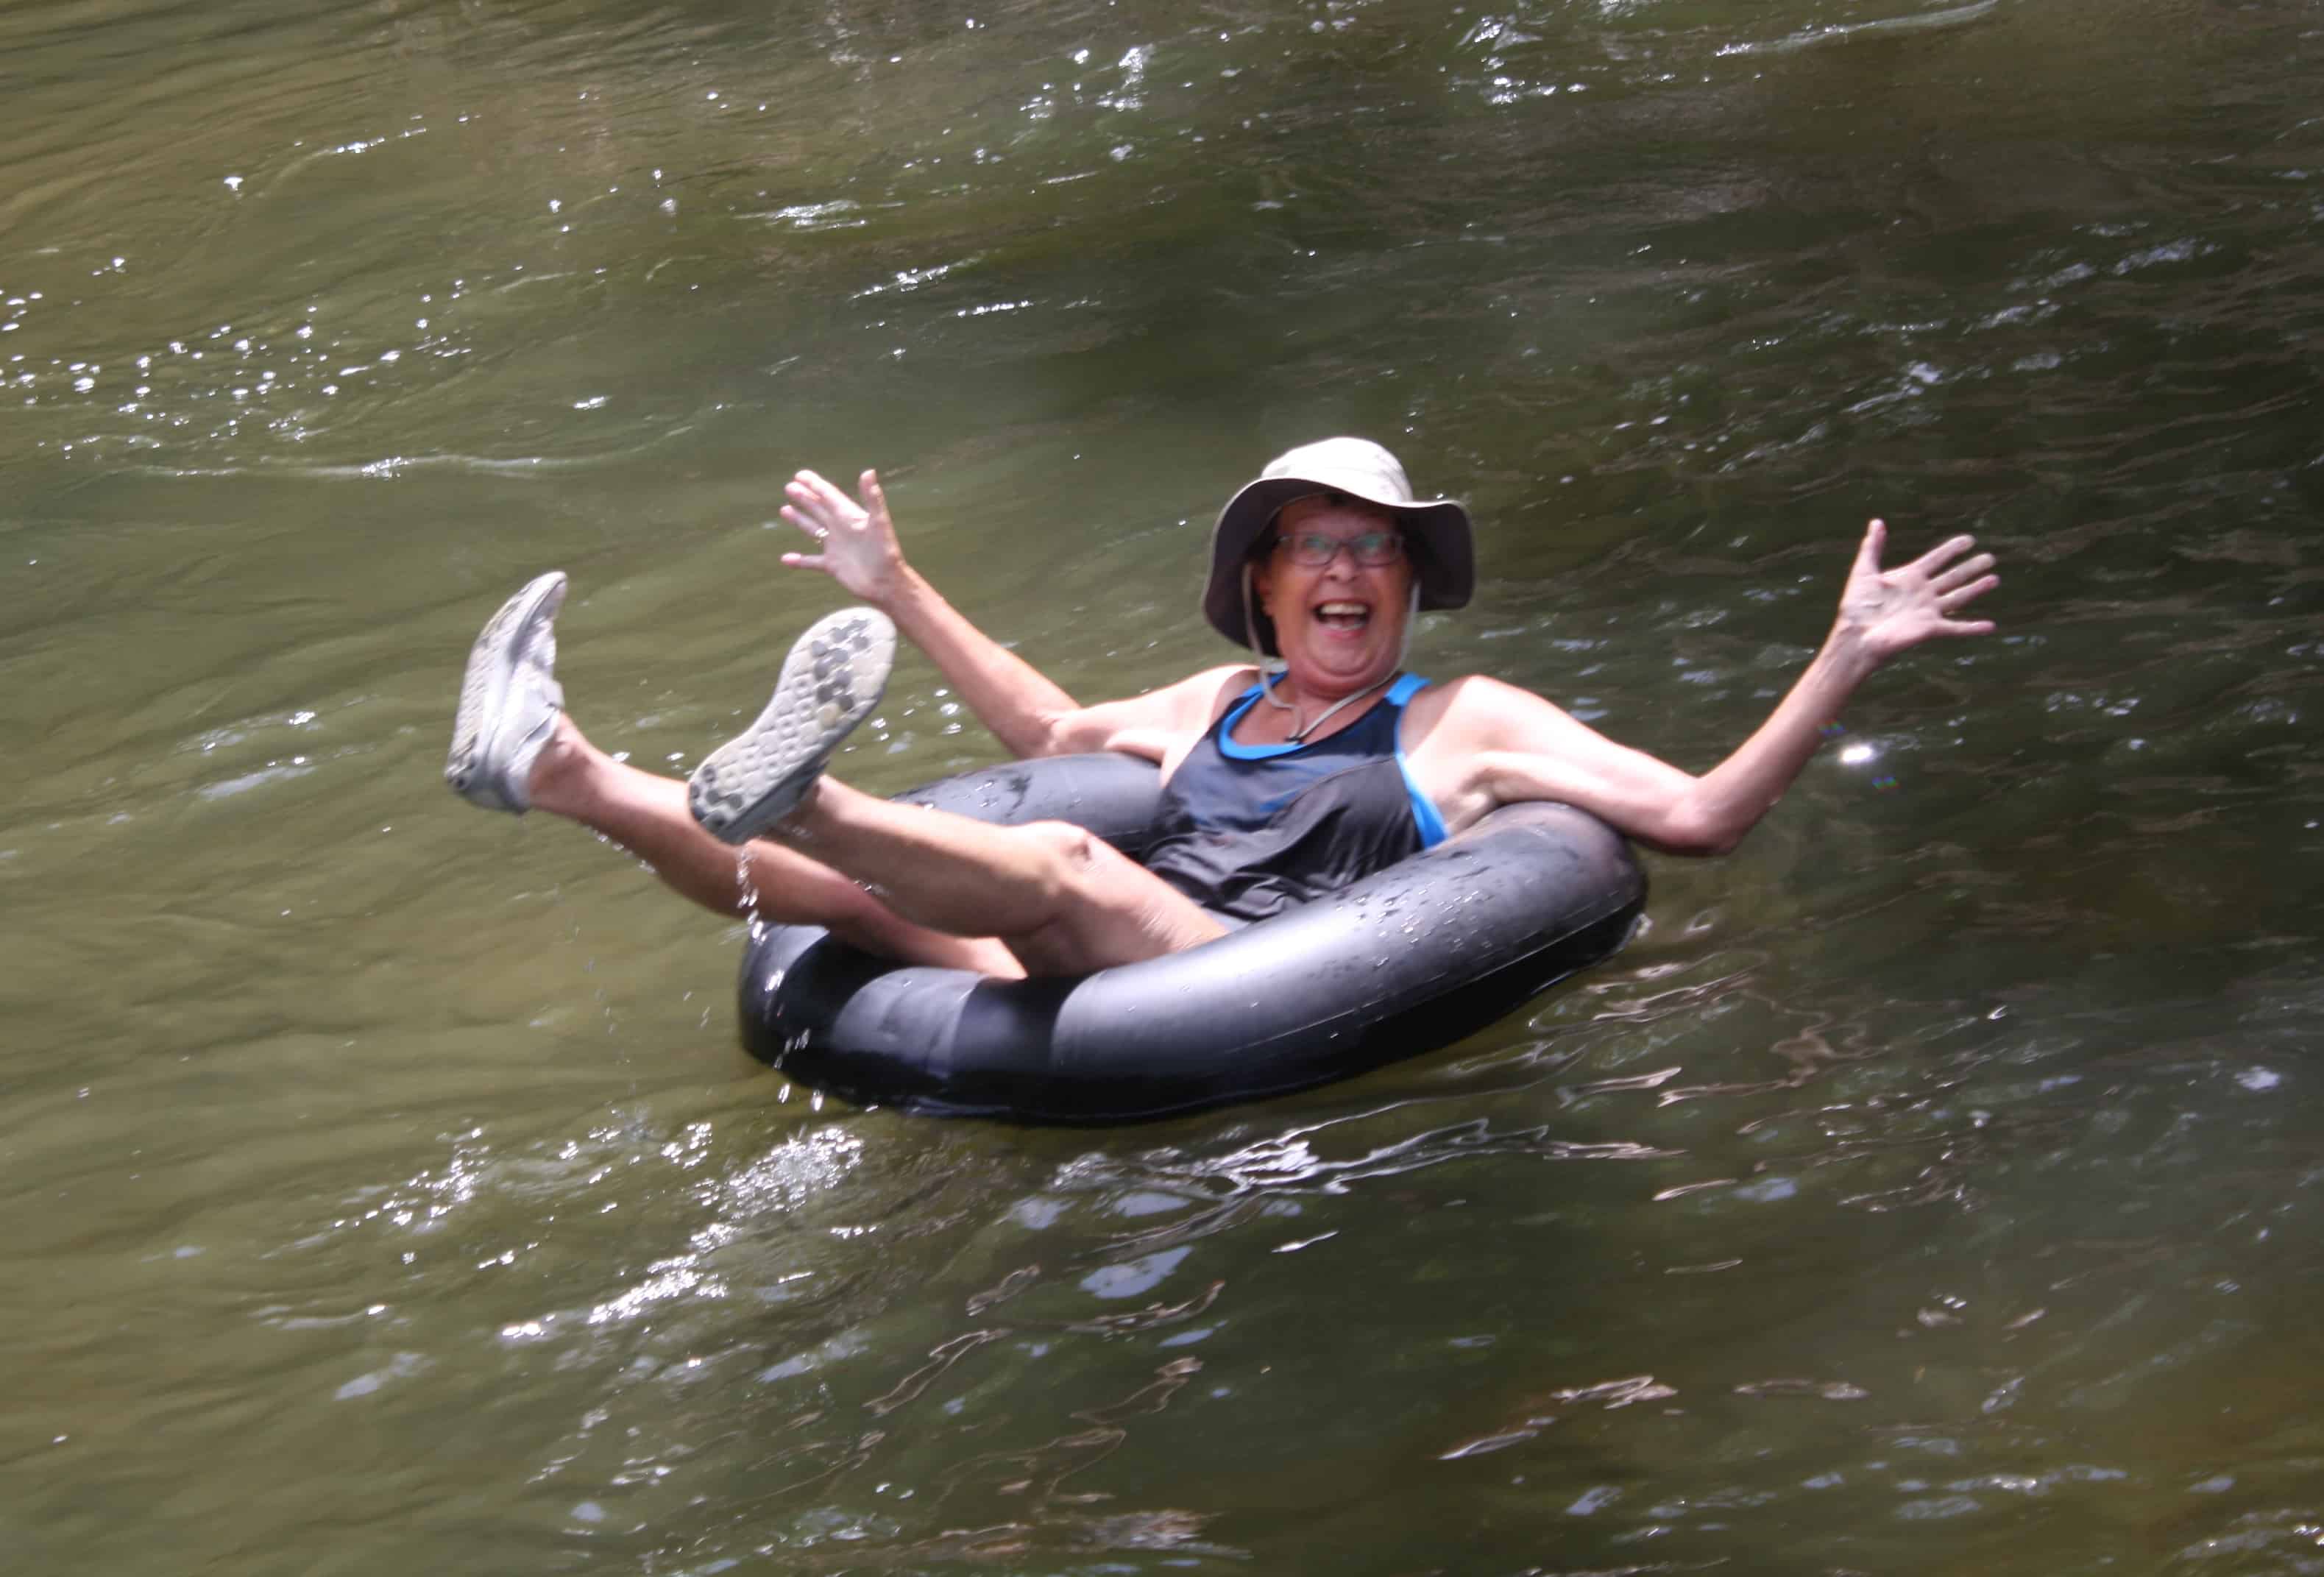 resident tubing along the river